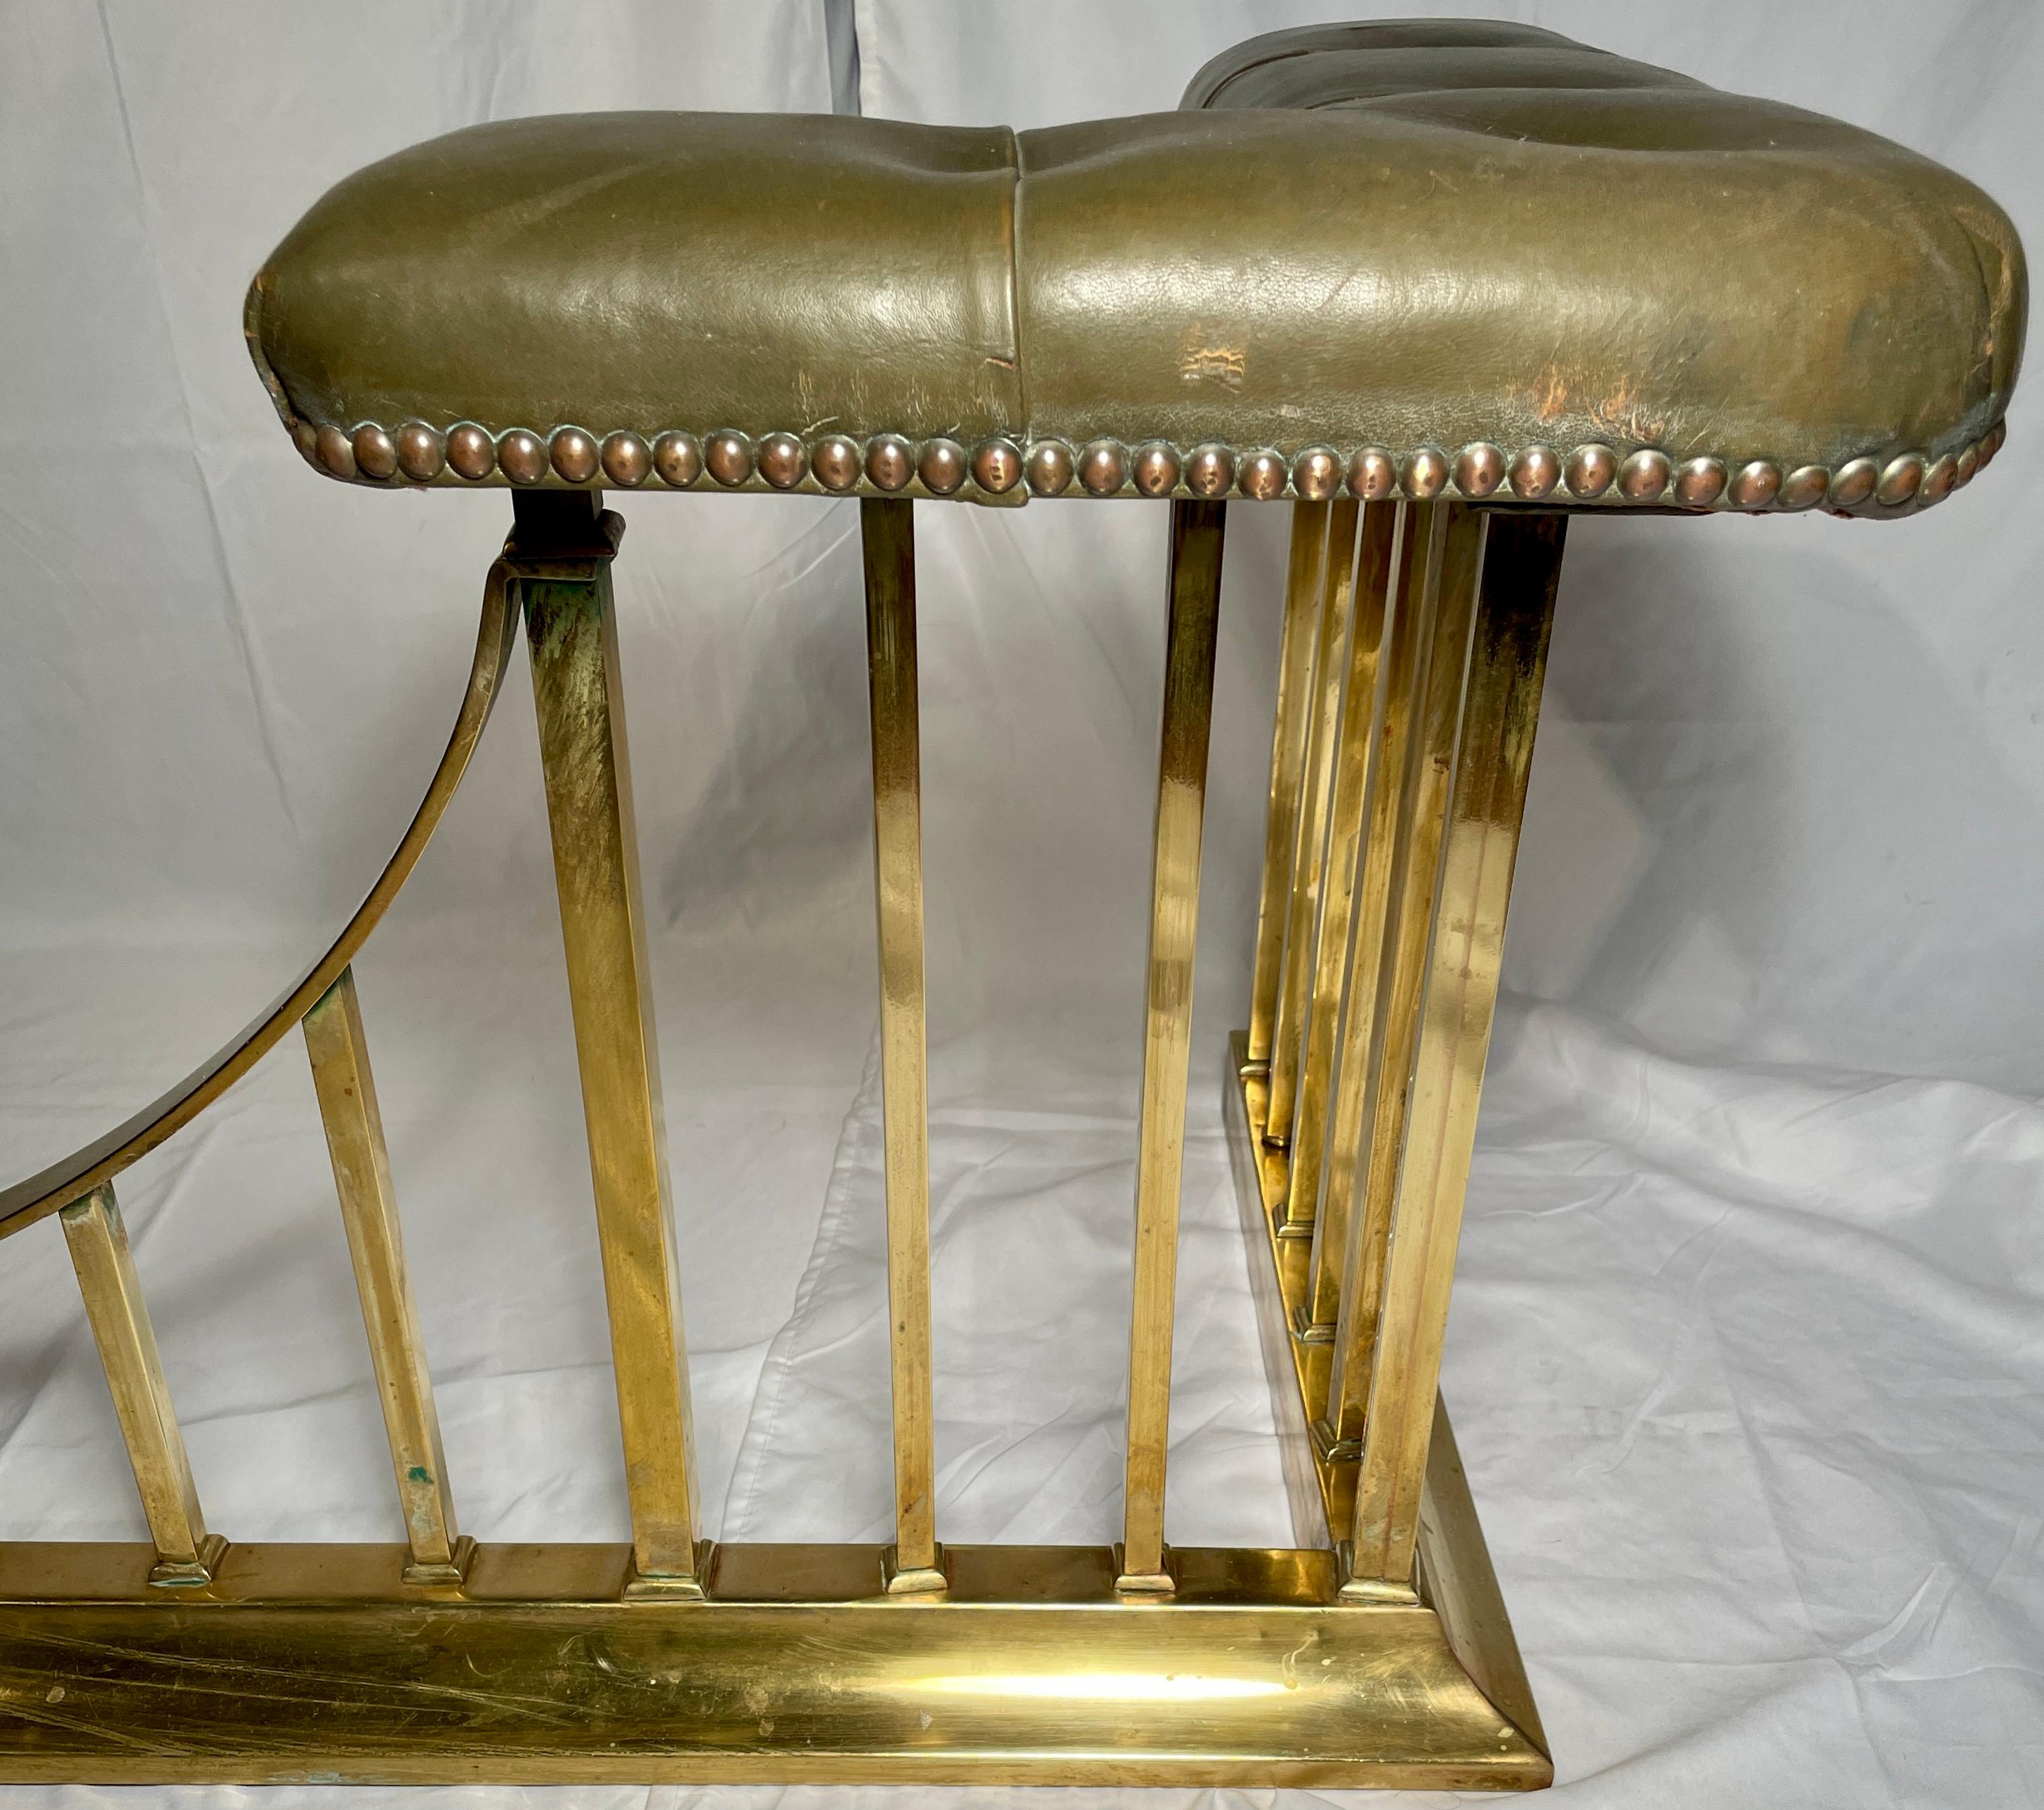 Victorian Antique English Solid Brass Fire Fender with Leather Club Seats, Circa 1890.